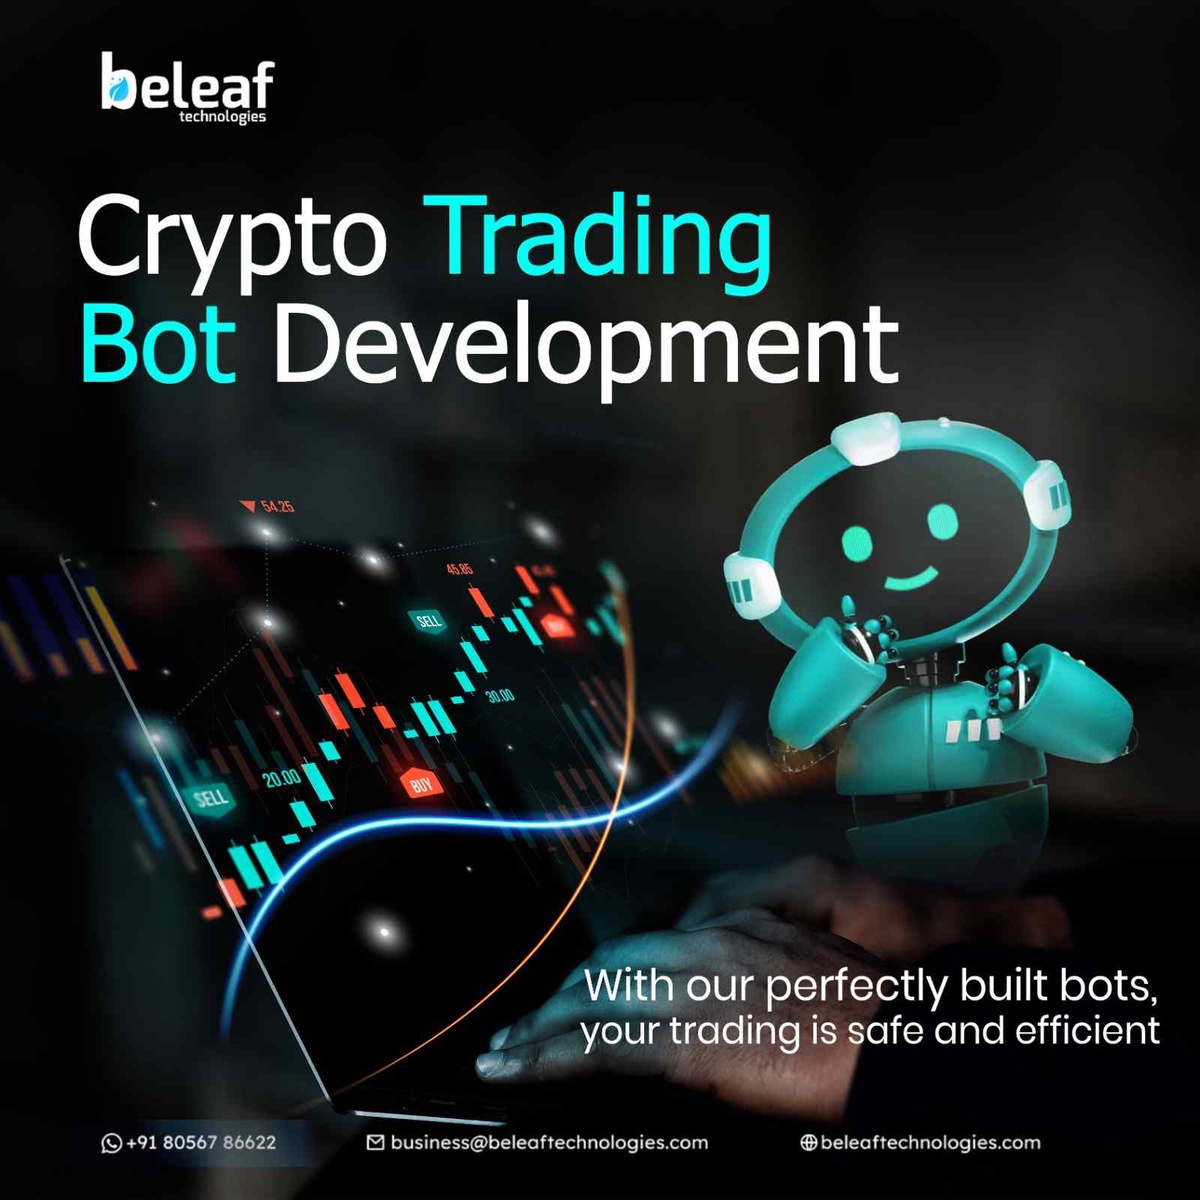 How to start your crypto trading bot development?